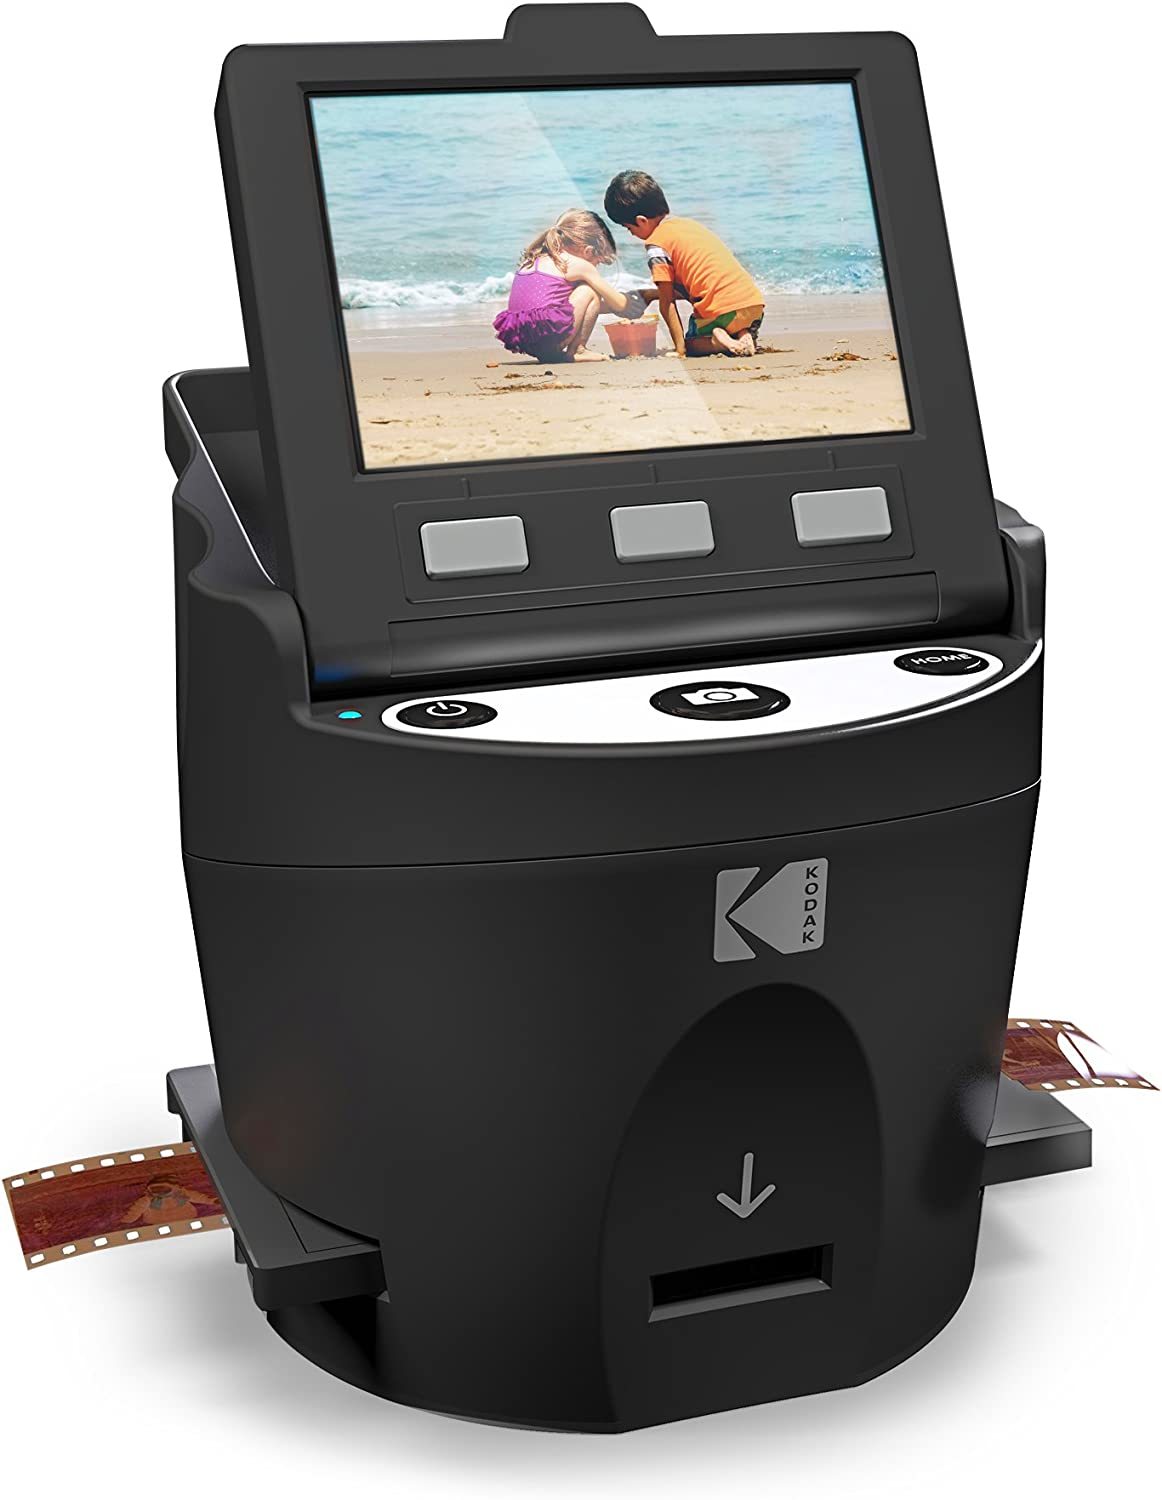 Digital Film And Slide Scanner From Kodak That Converts 35Mm, 126,, And Super 8 - $194.95